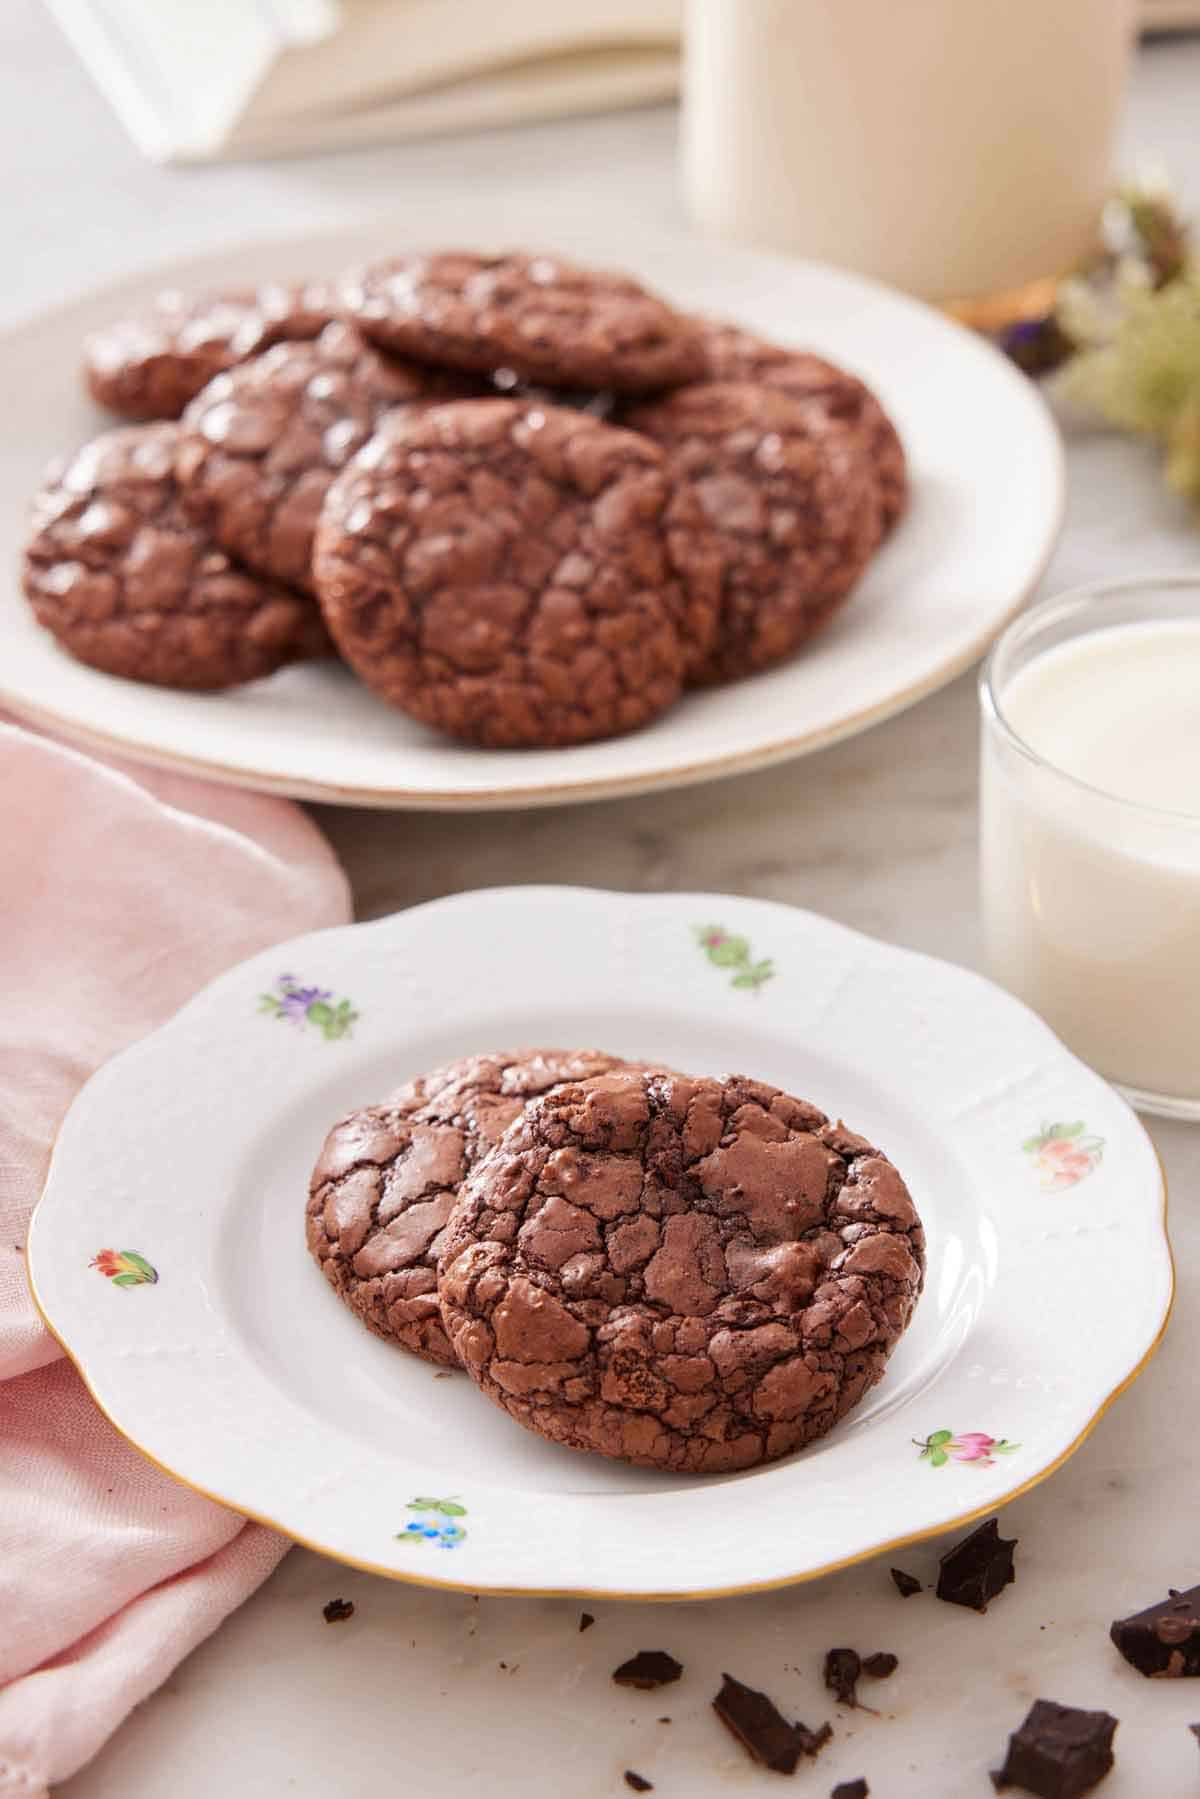 A plate with two brownie cookies with a cup of milk and platter of more cookies in the background.